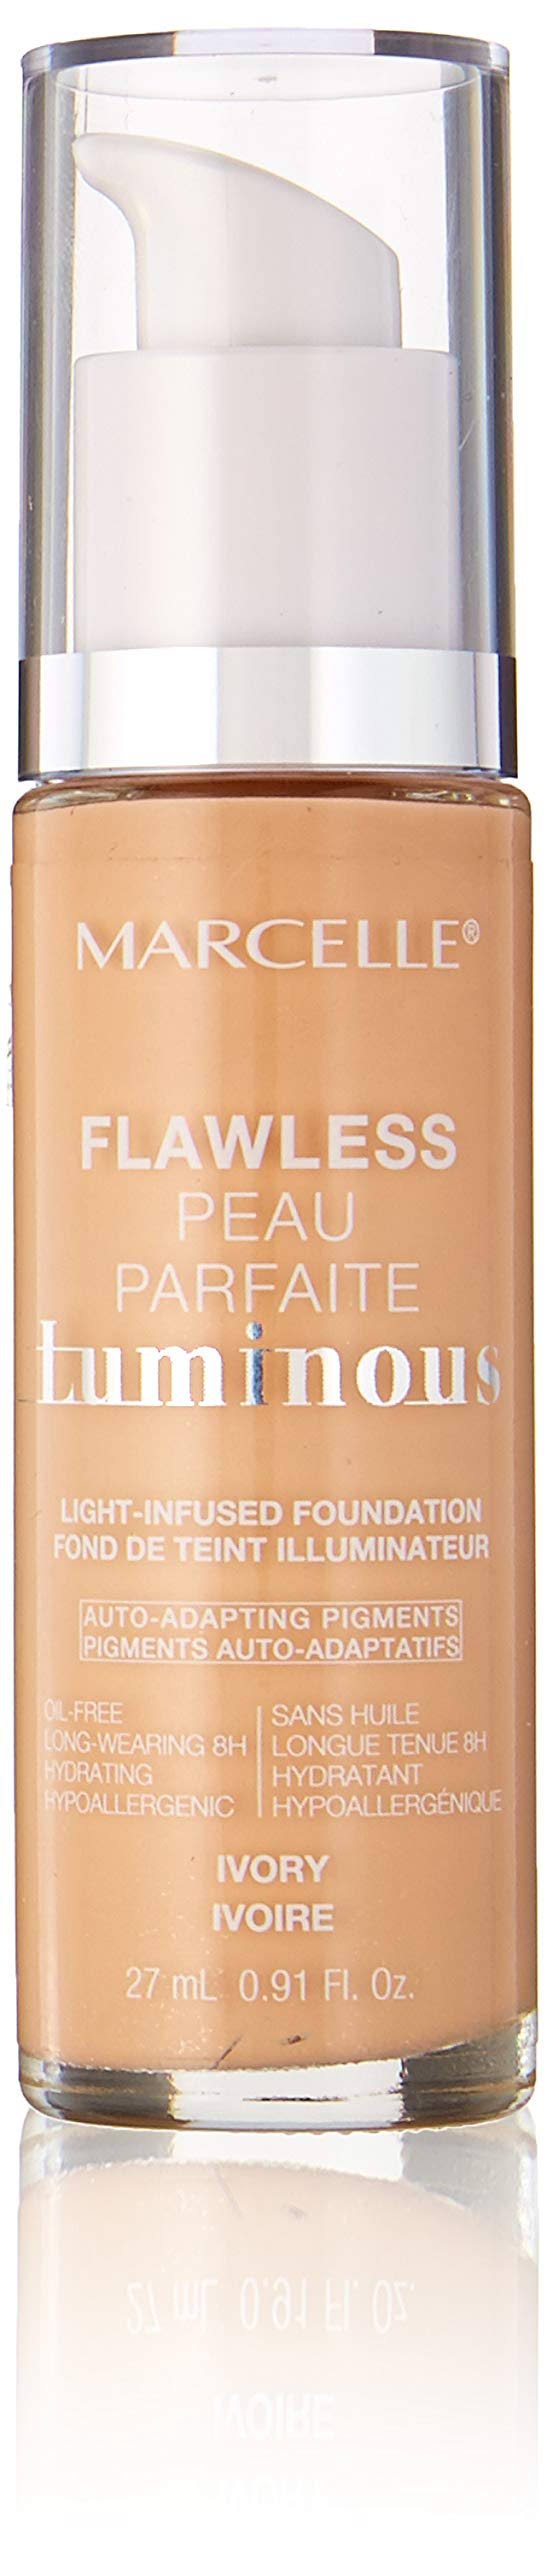 Marcelle Flawless Luminous Foundation, Ivory, Hypoallergenic and Fragr